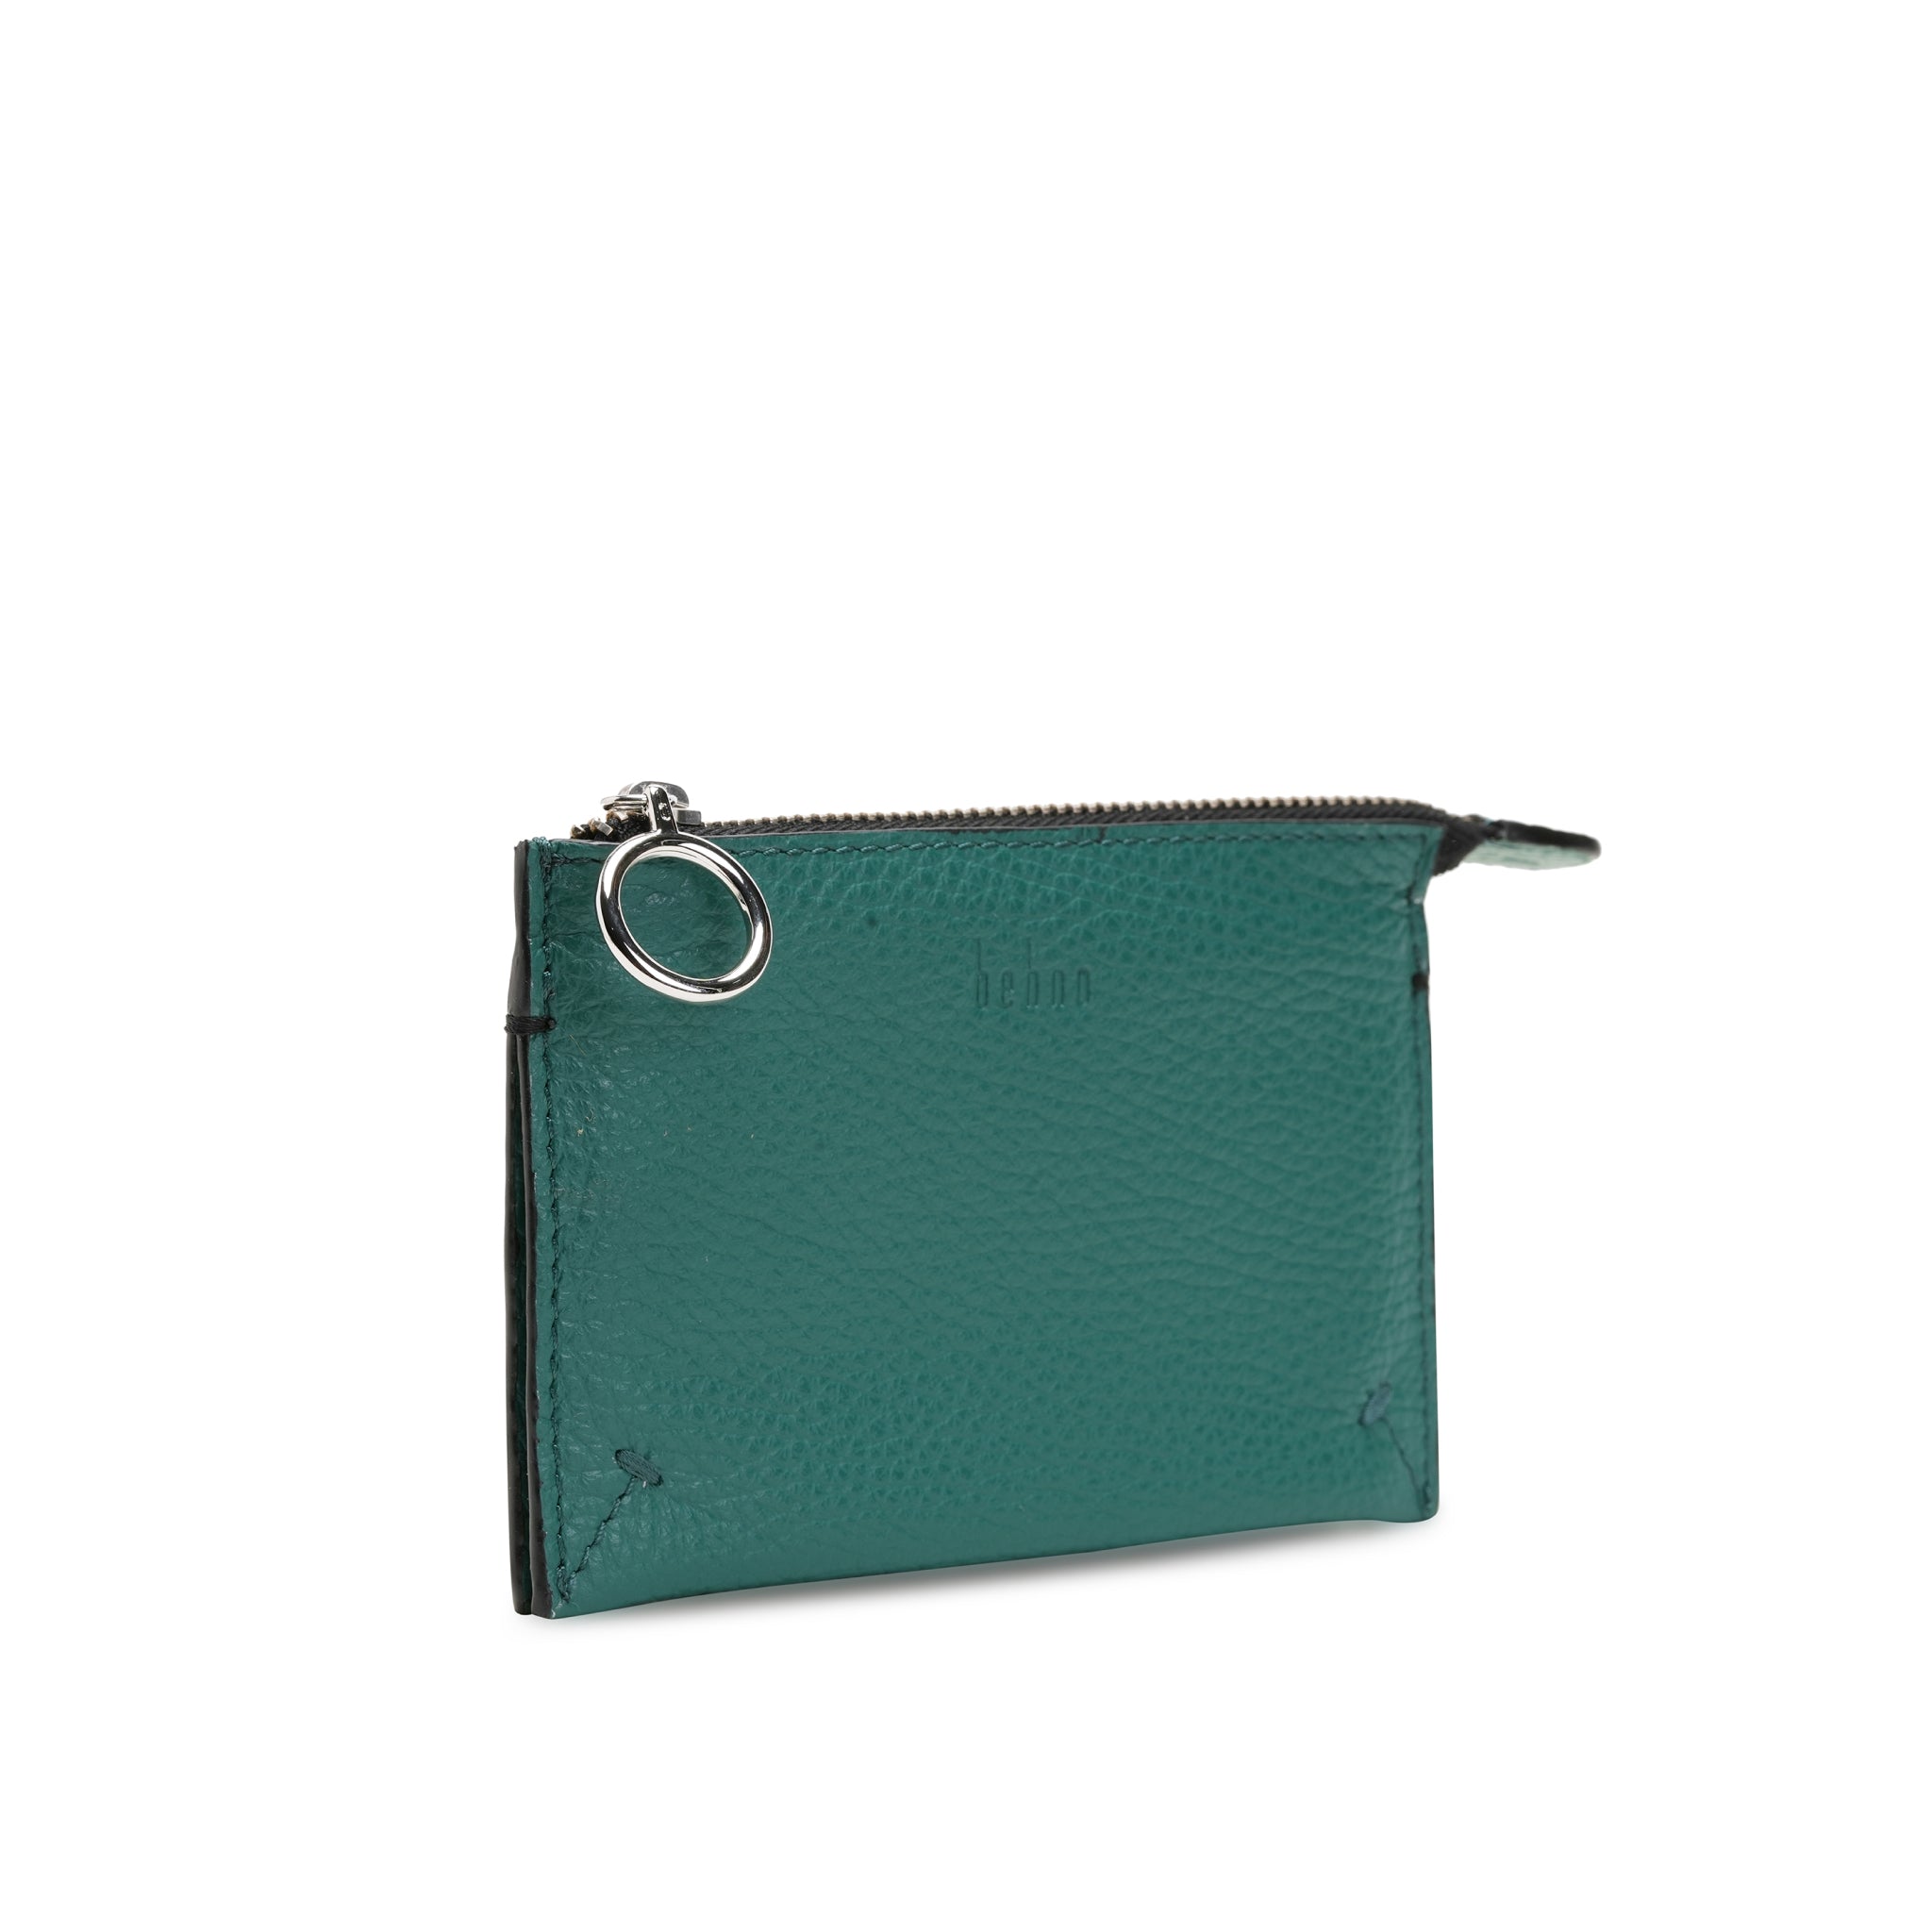 CLN - New addition to your wallet collection. Shop the